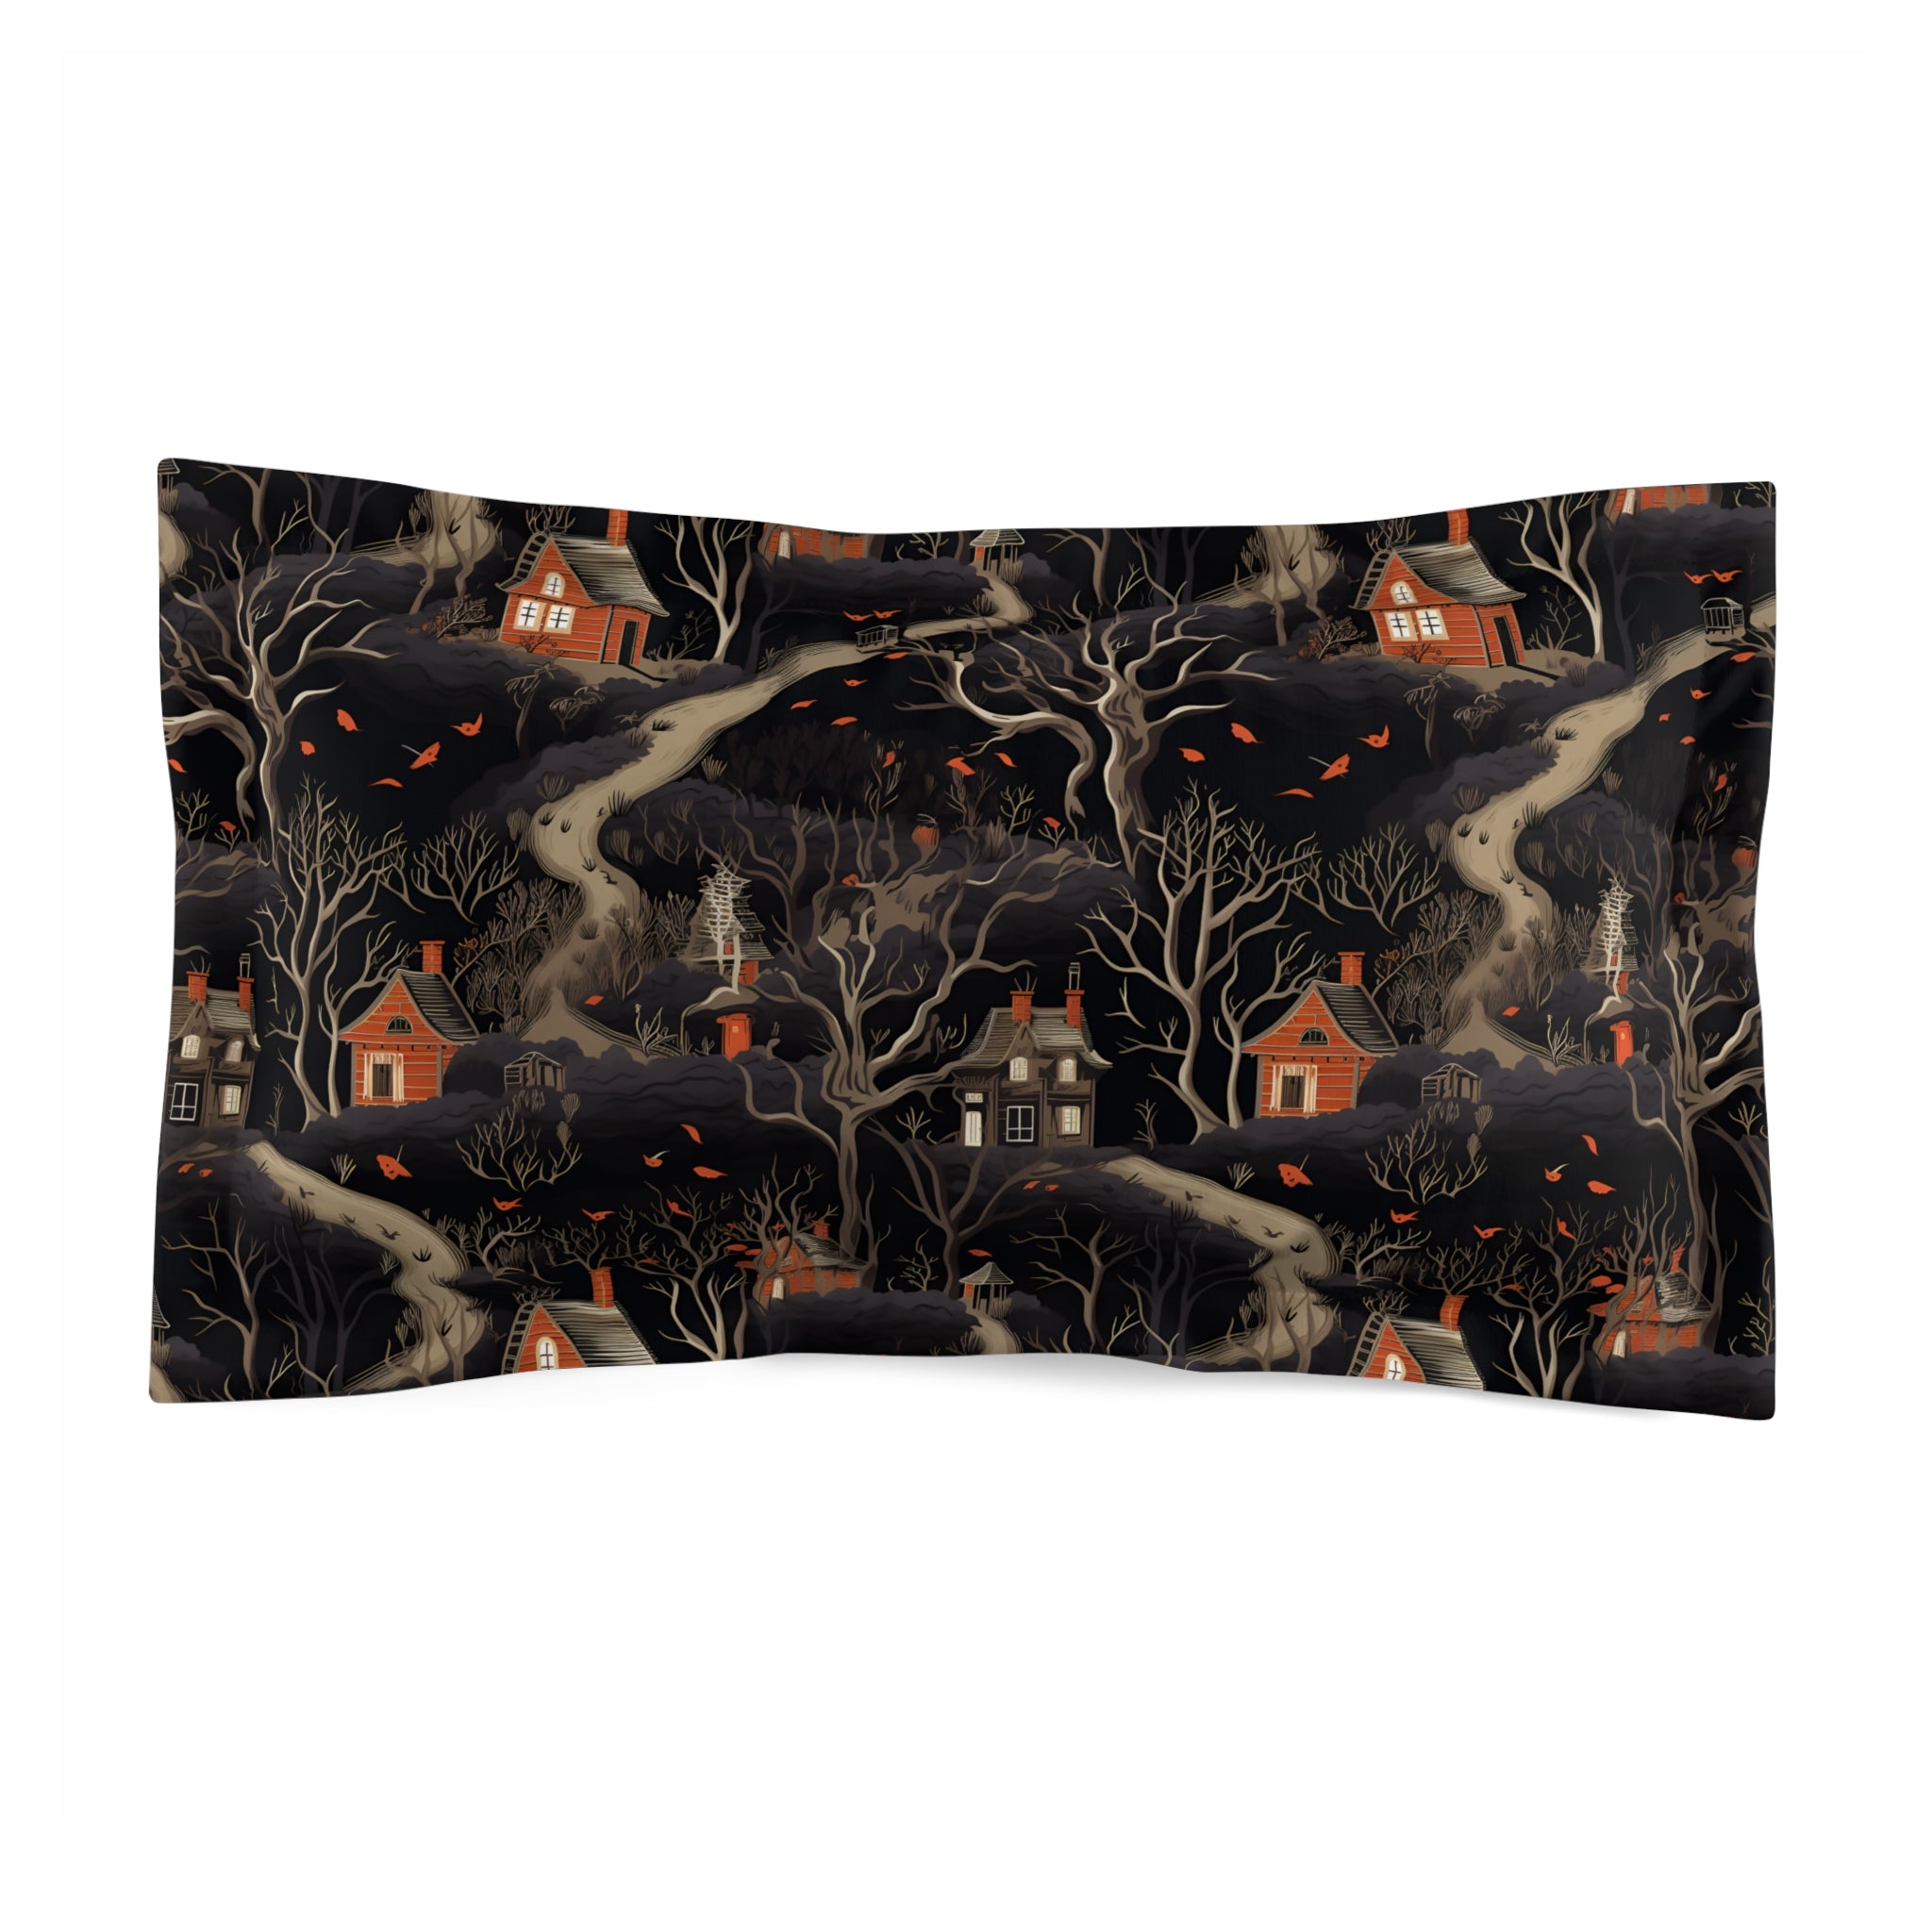 Witches Woodland Duvet Cover with Pillow Shams Cottagecore, Microfiber